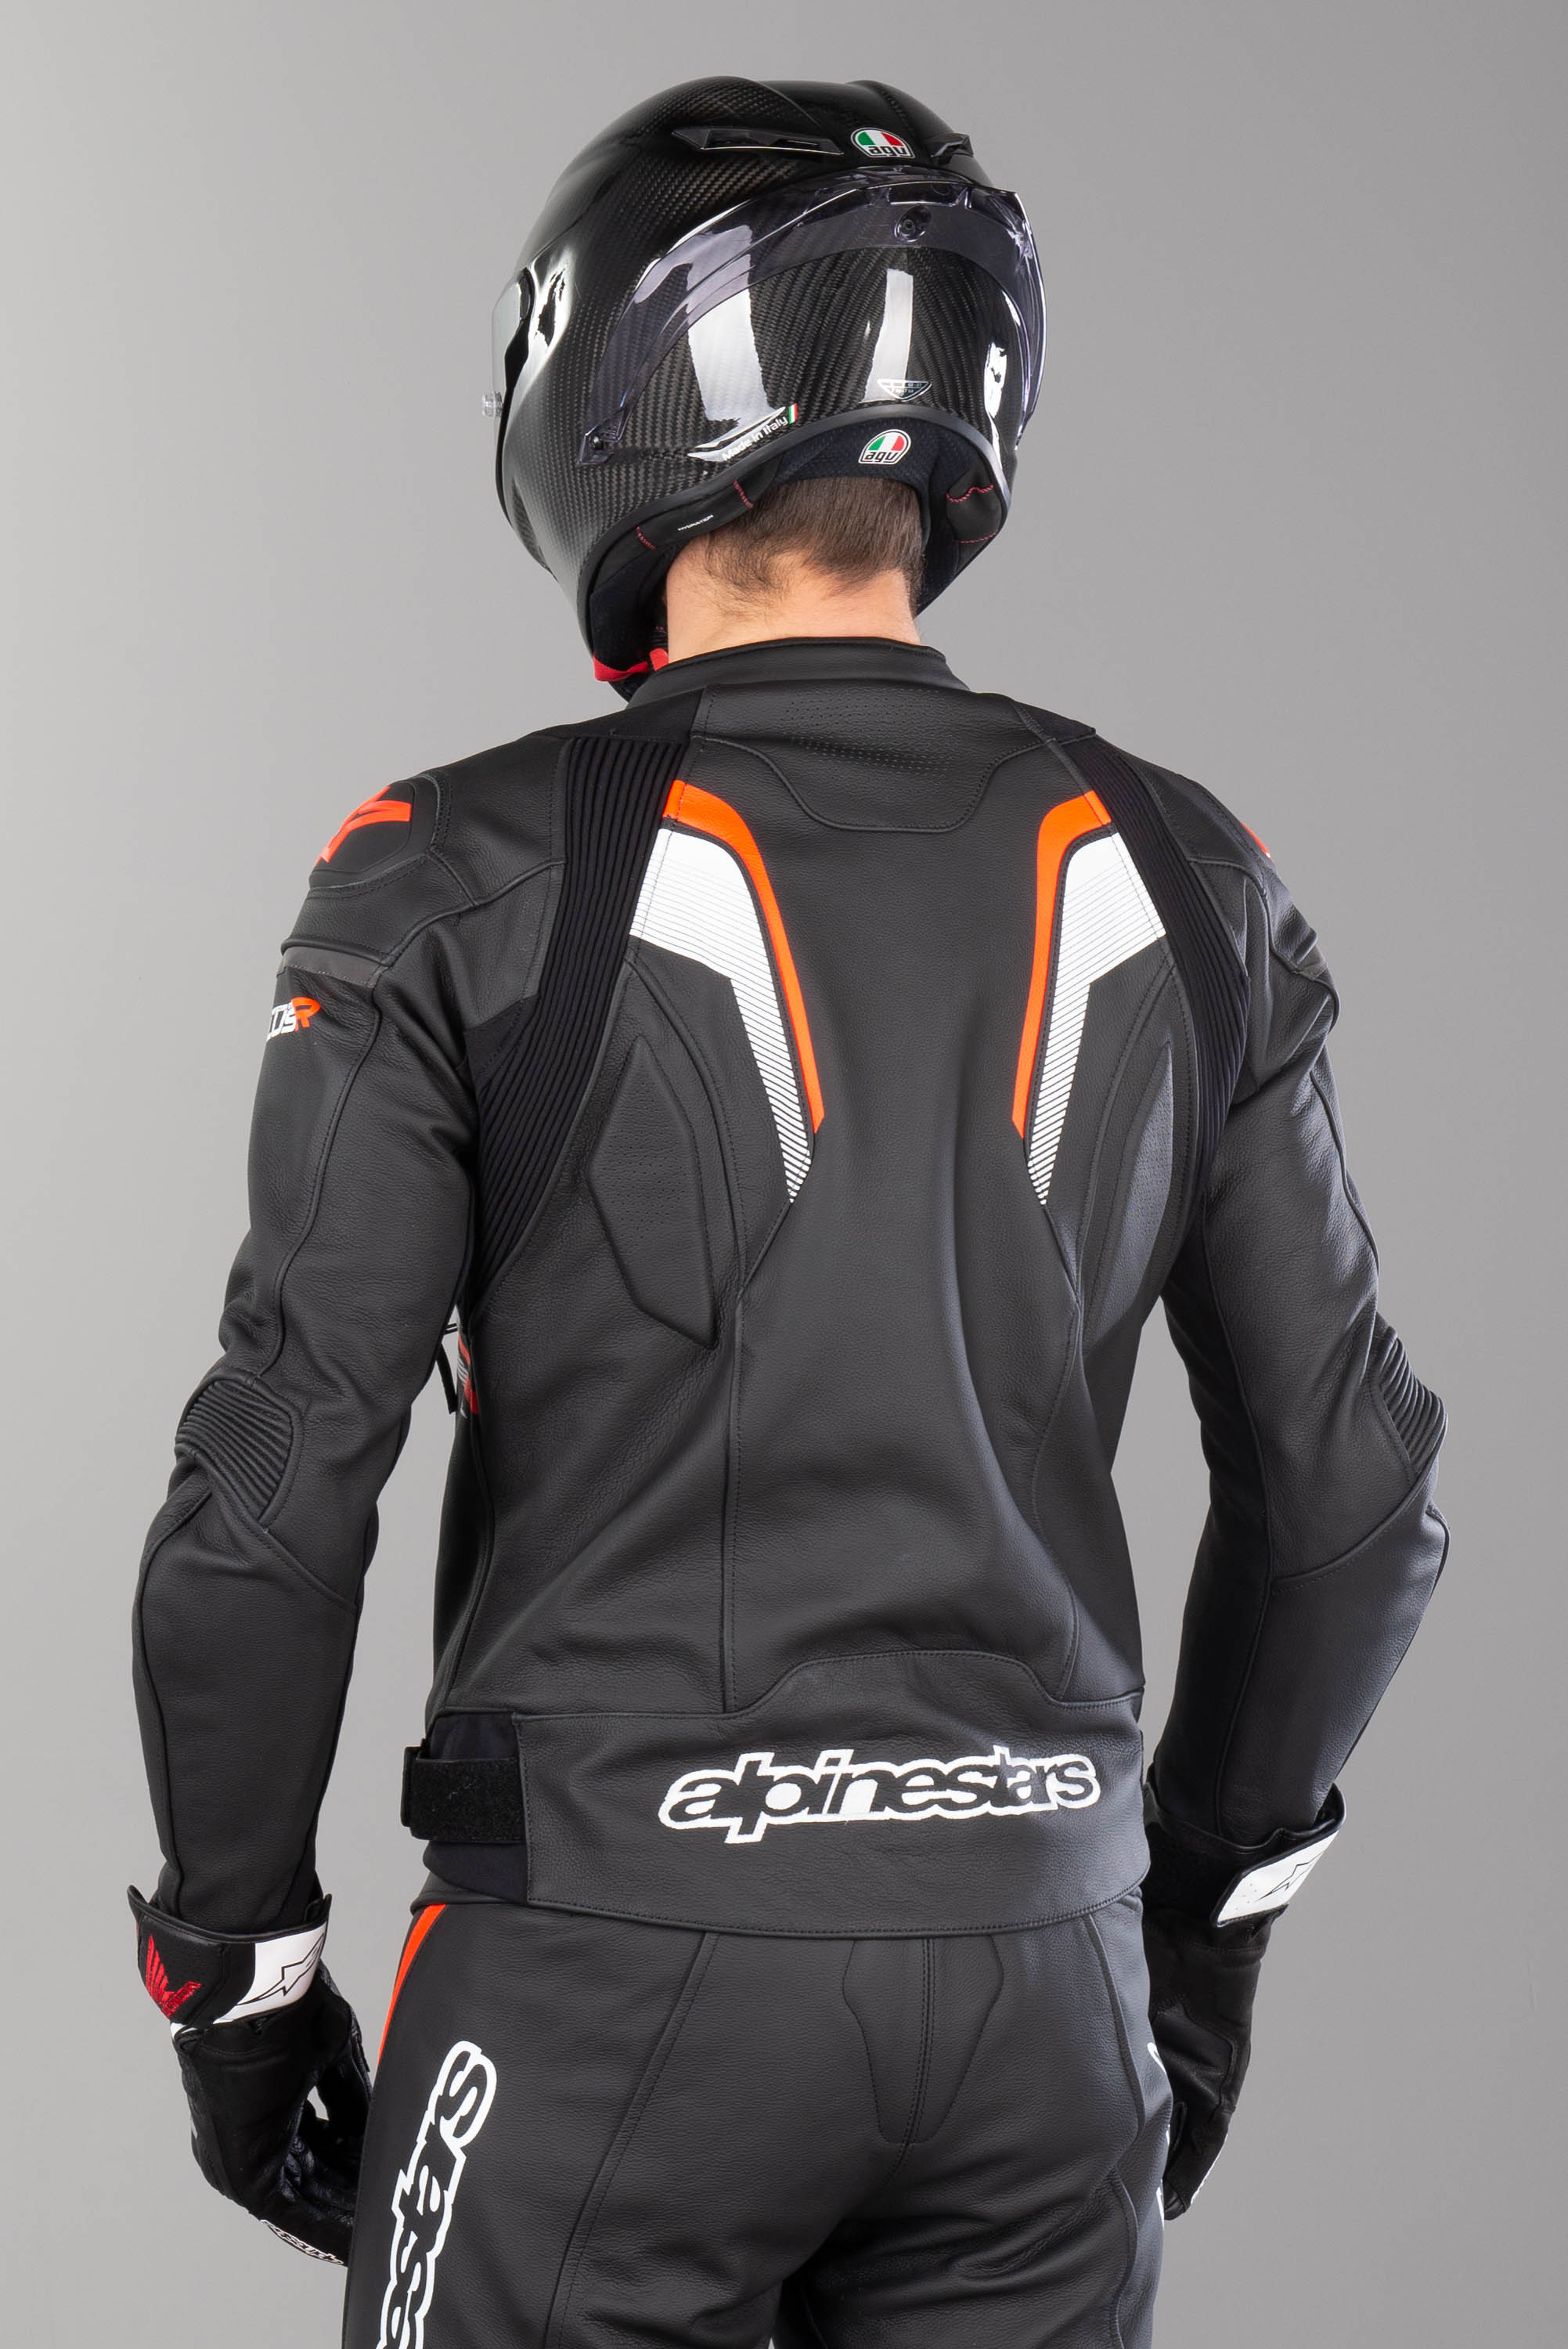 Alpinestars 2016 Collection For Street Sport and Racing  Motorcyclist